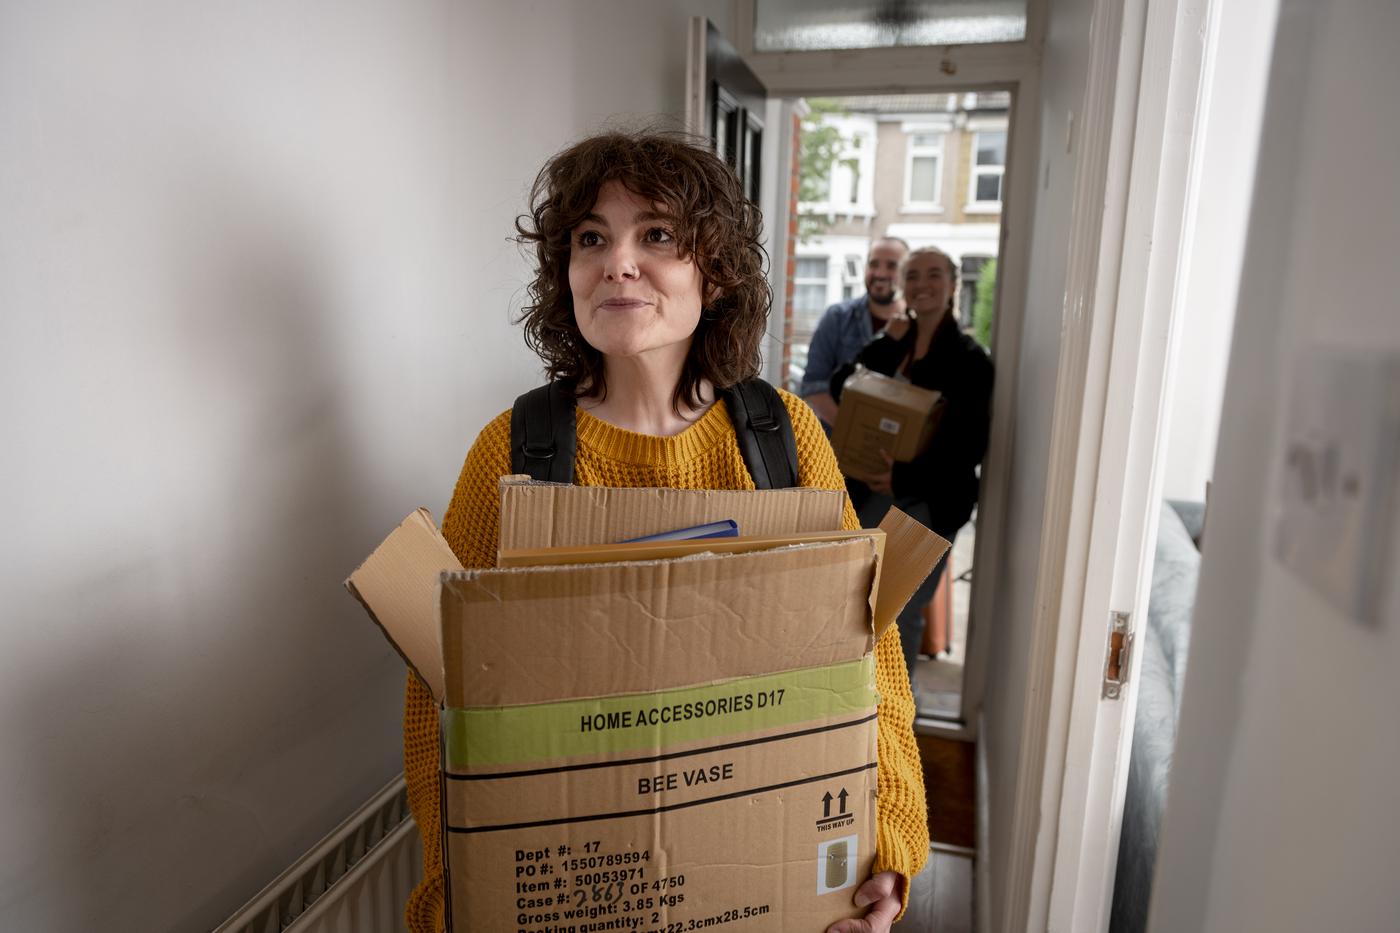 A woman standing in the hallway of a house holding a cardboard box